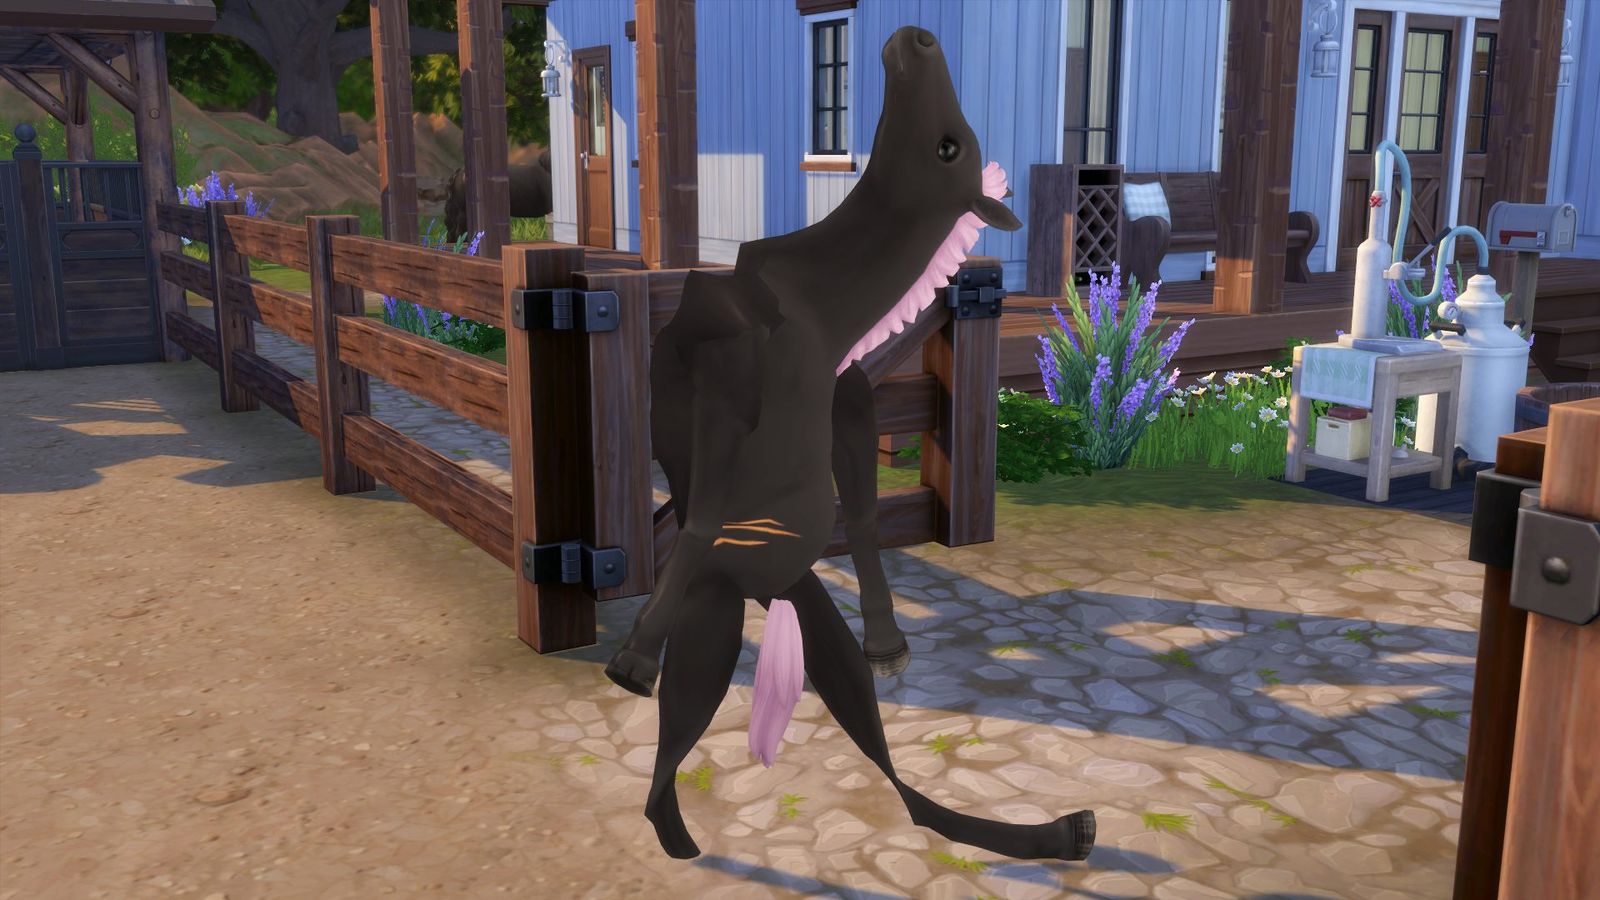 The Sims 4 Horse Ranch DLC review - a horse's body all twisted up in a bizarre eldritch glitch